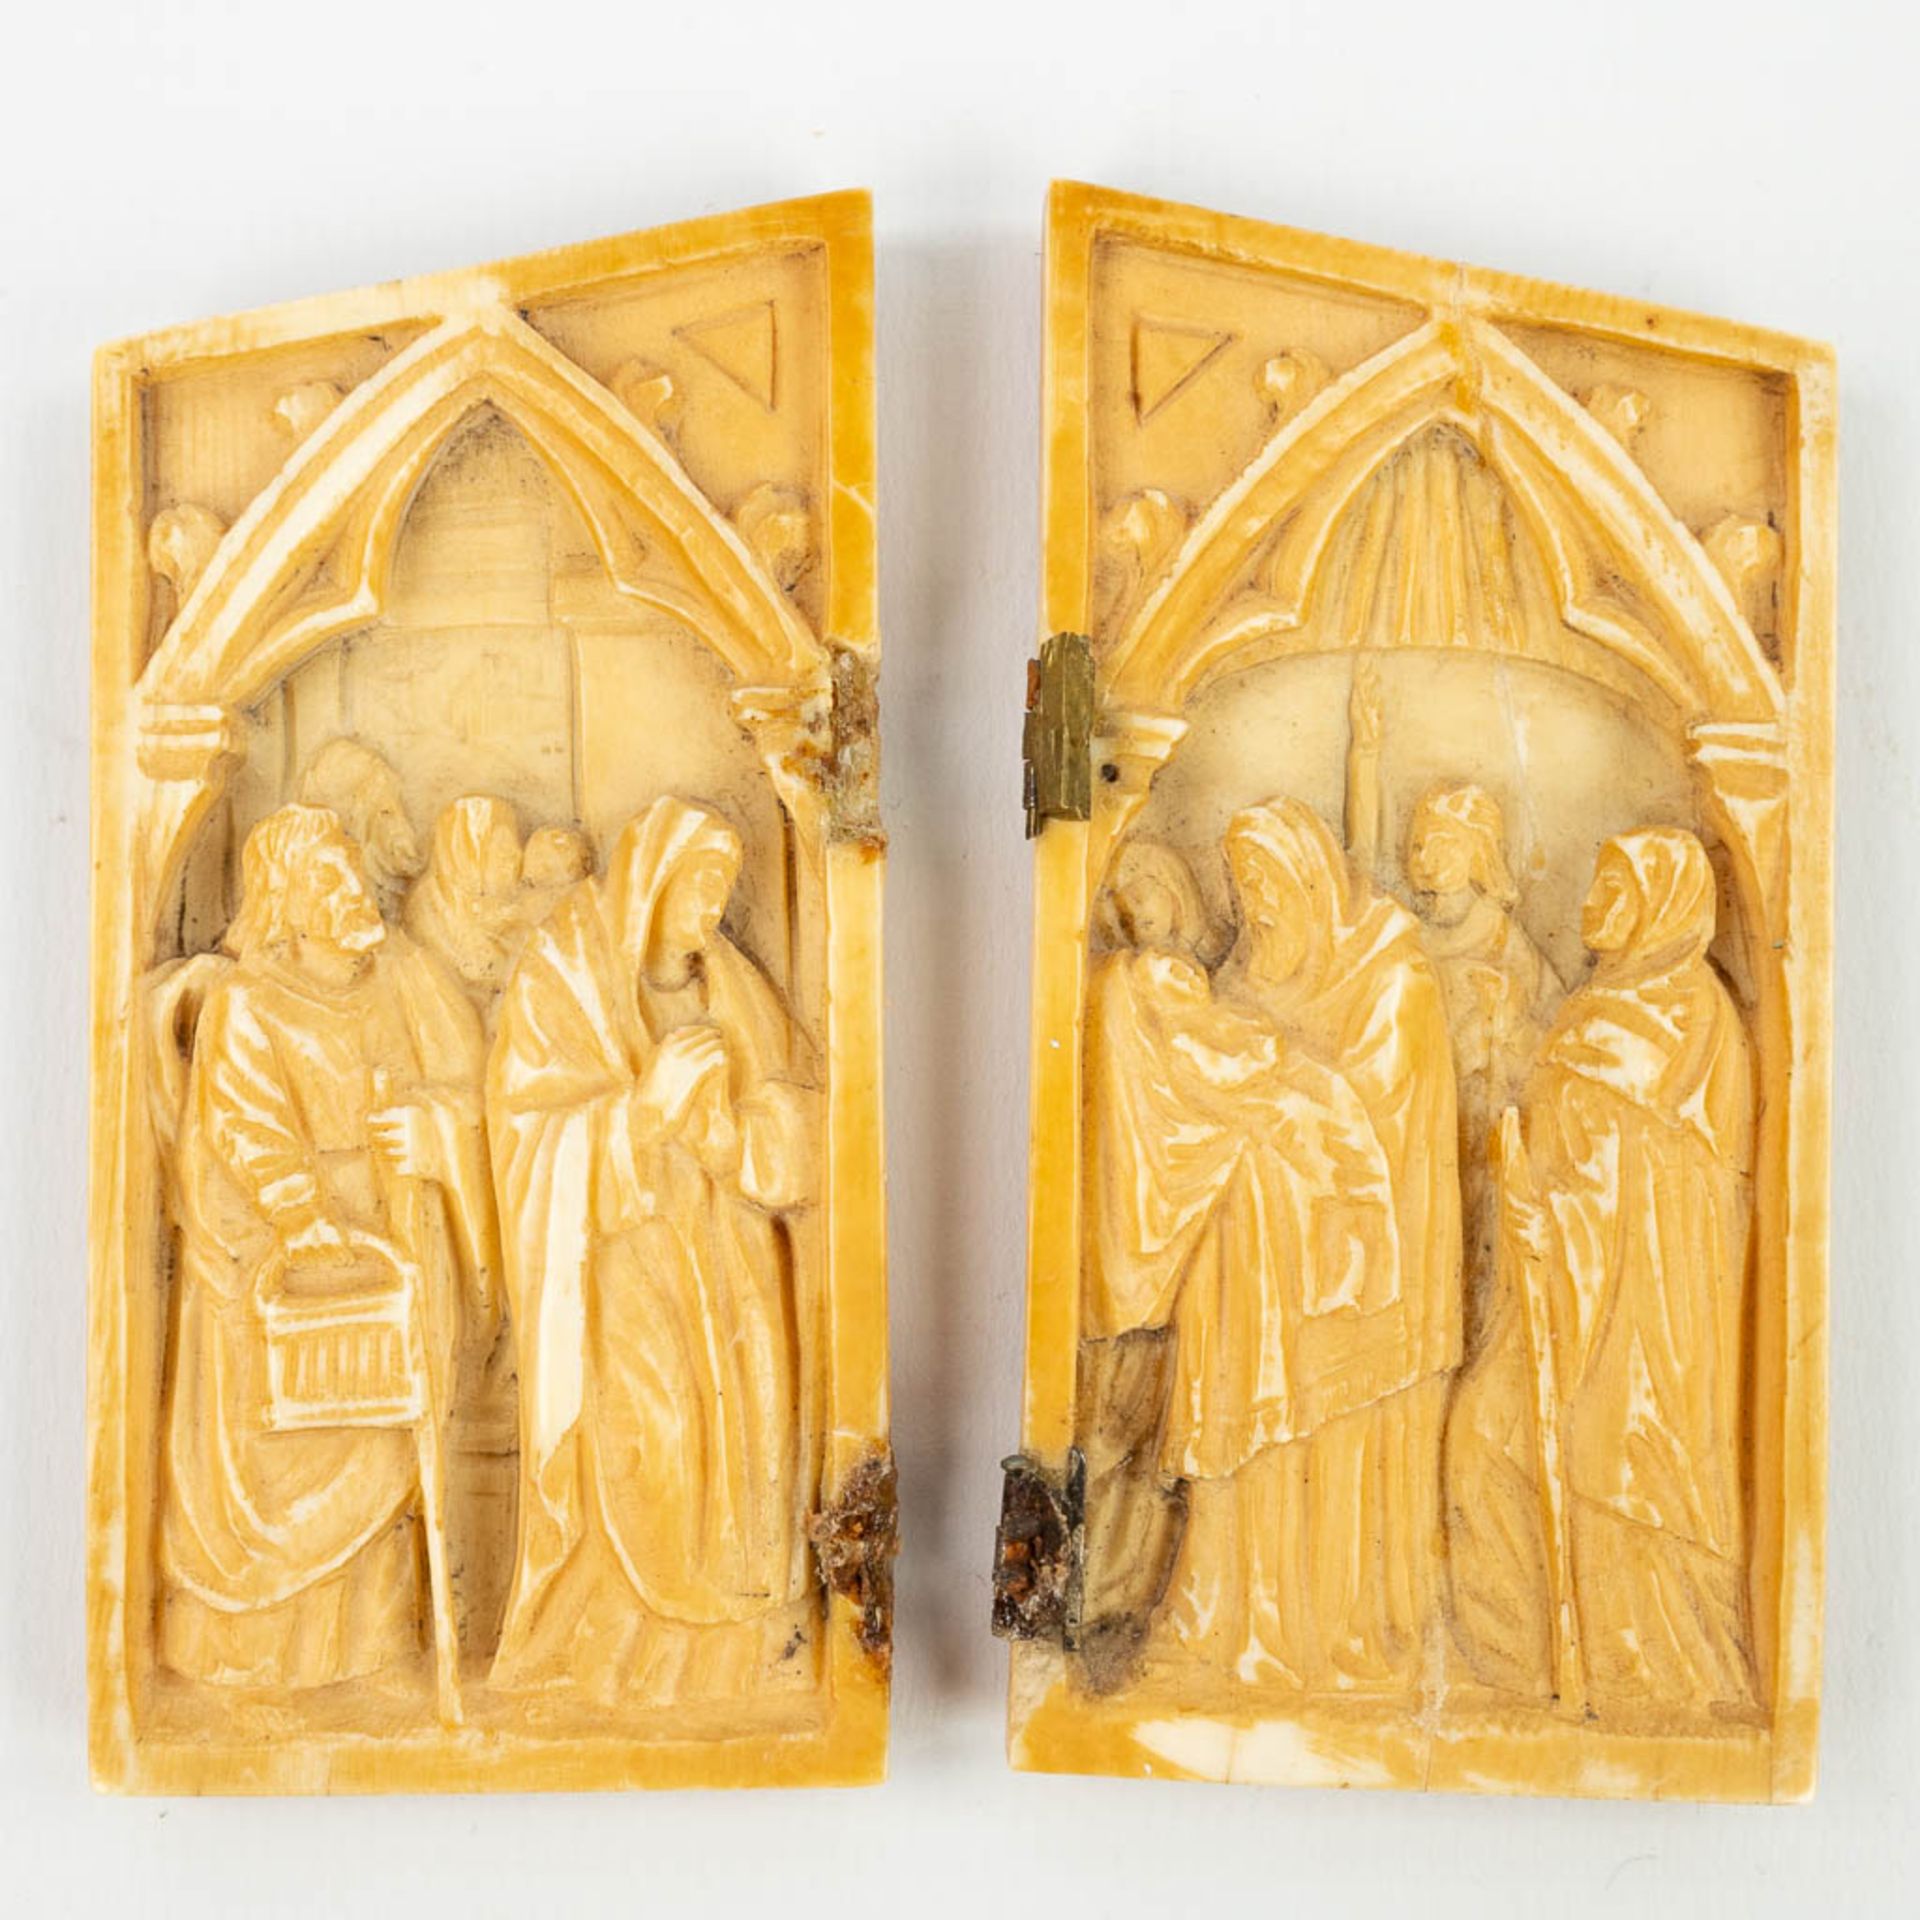 An antique Diptych made of ivory 'The Birth of Christ' in a Gothic Revival style. Added a small trin - Image 13 of 13